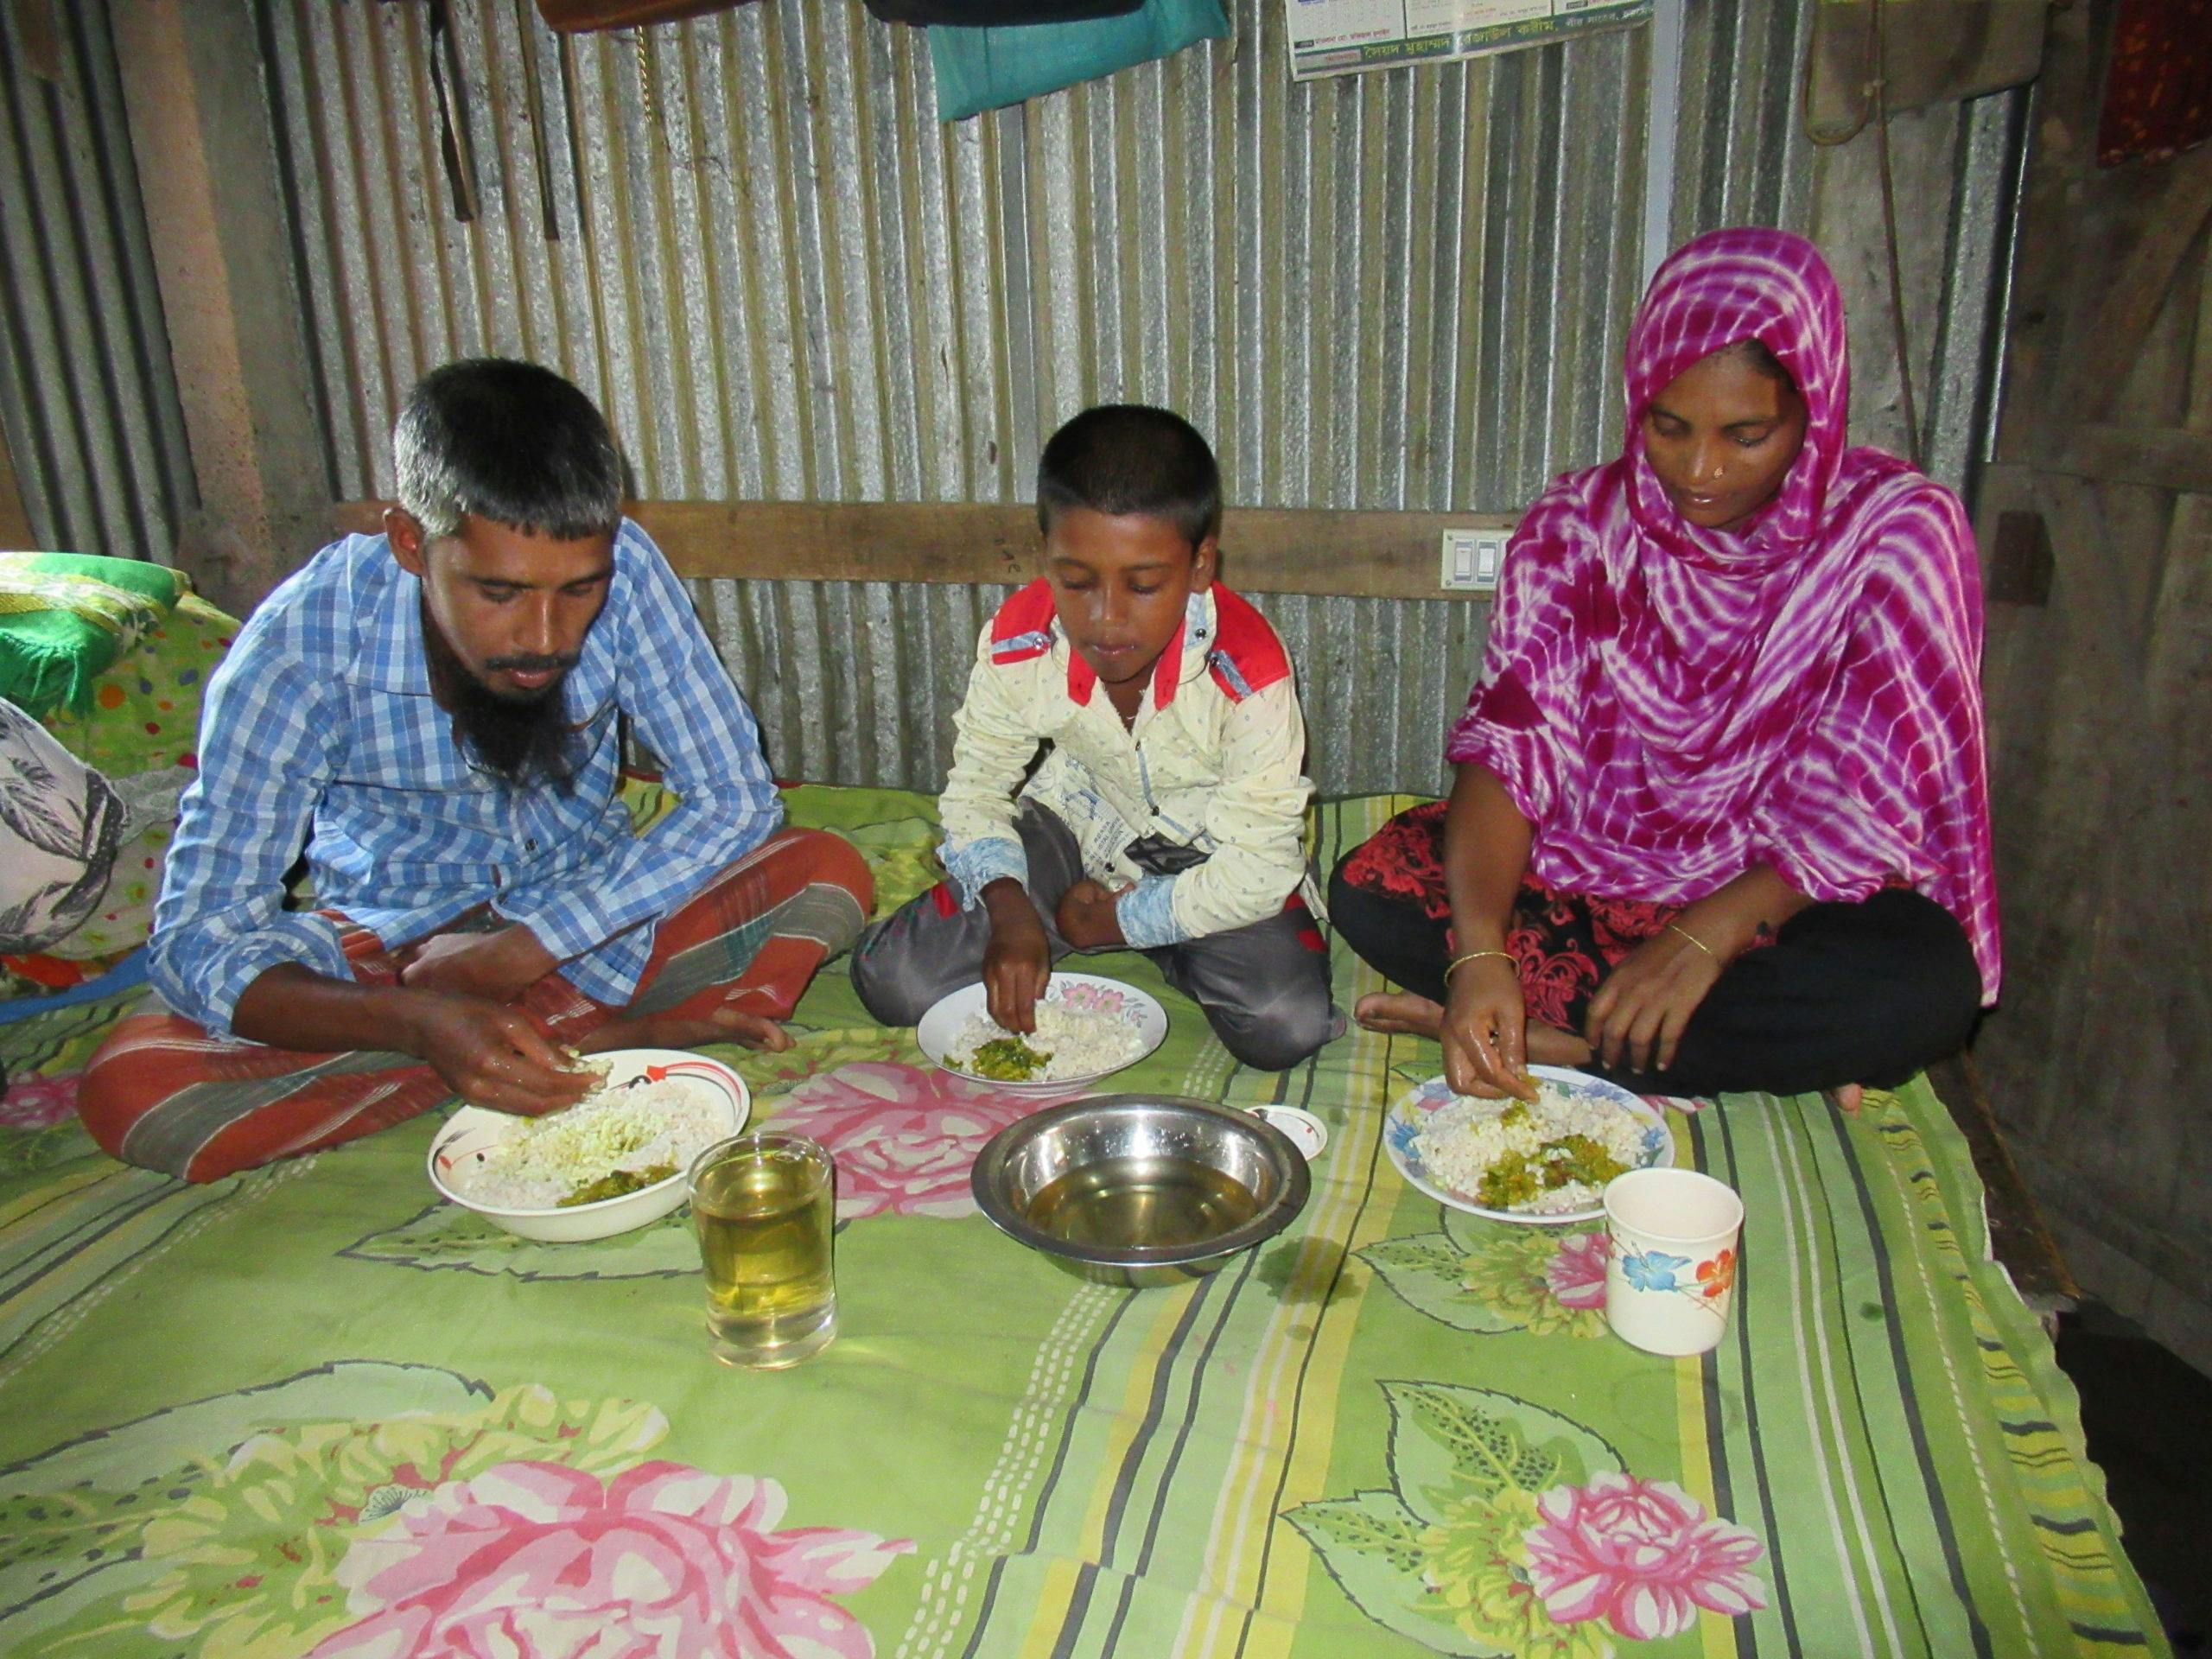 Mustakin and family eating dinner together